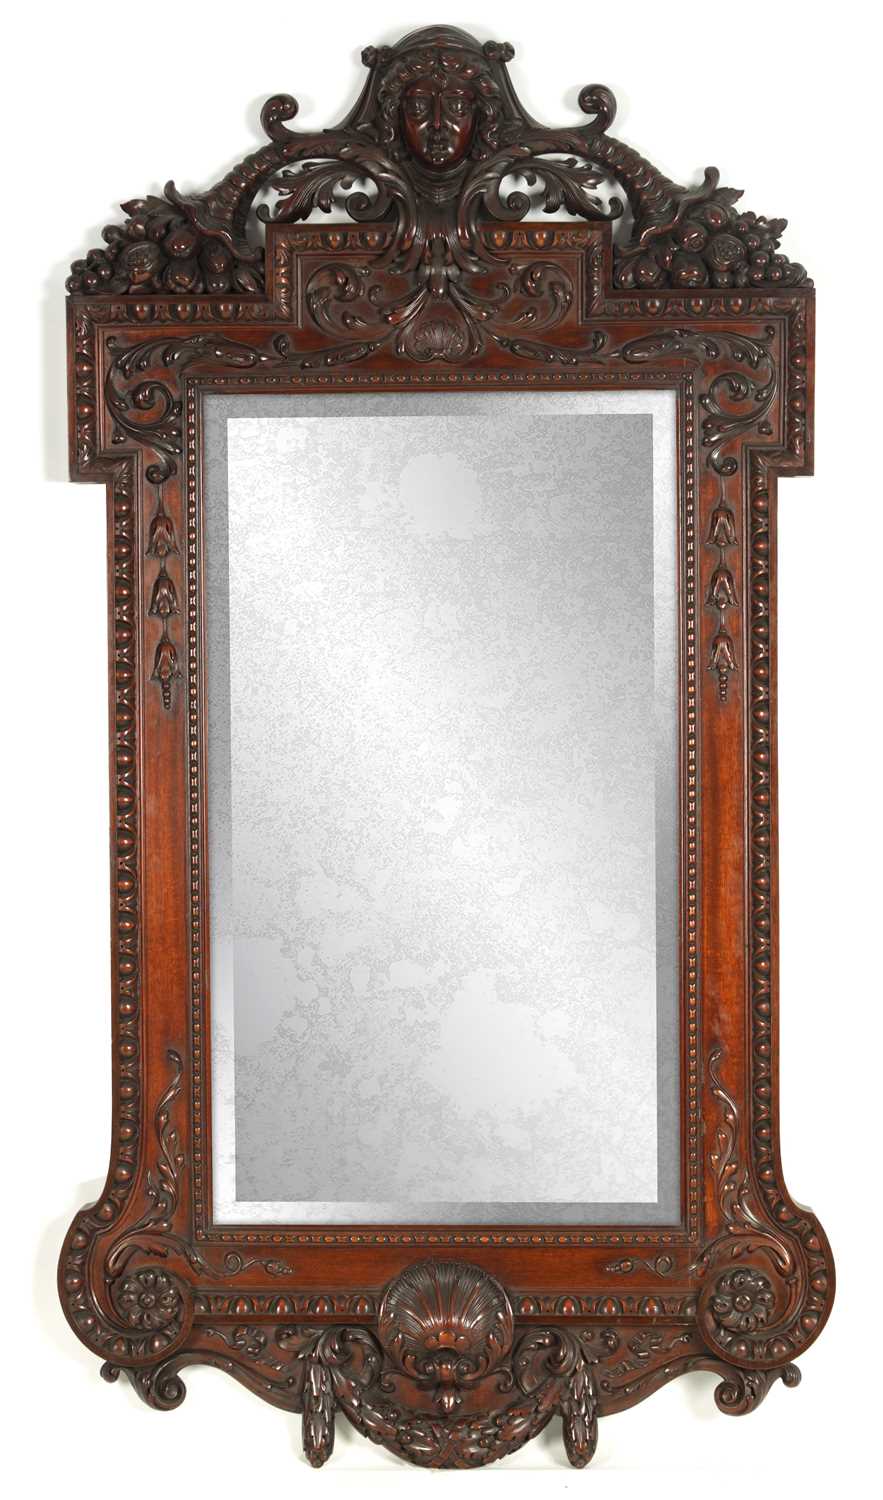 Lot 1022 - A GOOD QUALITY LATE 19TH CENTURY MAHOGANY HANGING MIRROR IN THE MANNER OF WILLIAM KENT PROBABLY BY WARING AND GILLOW